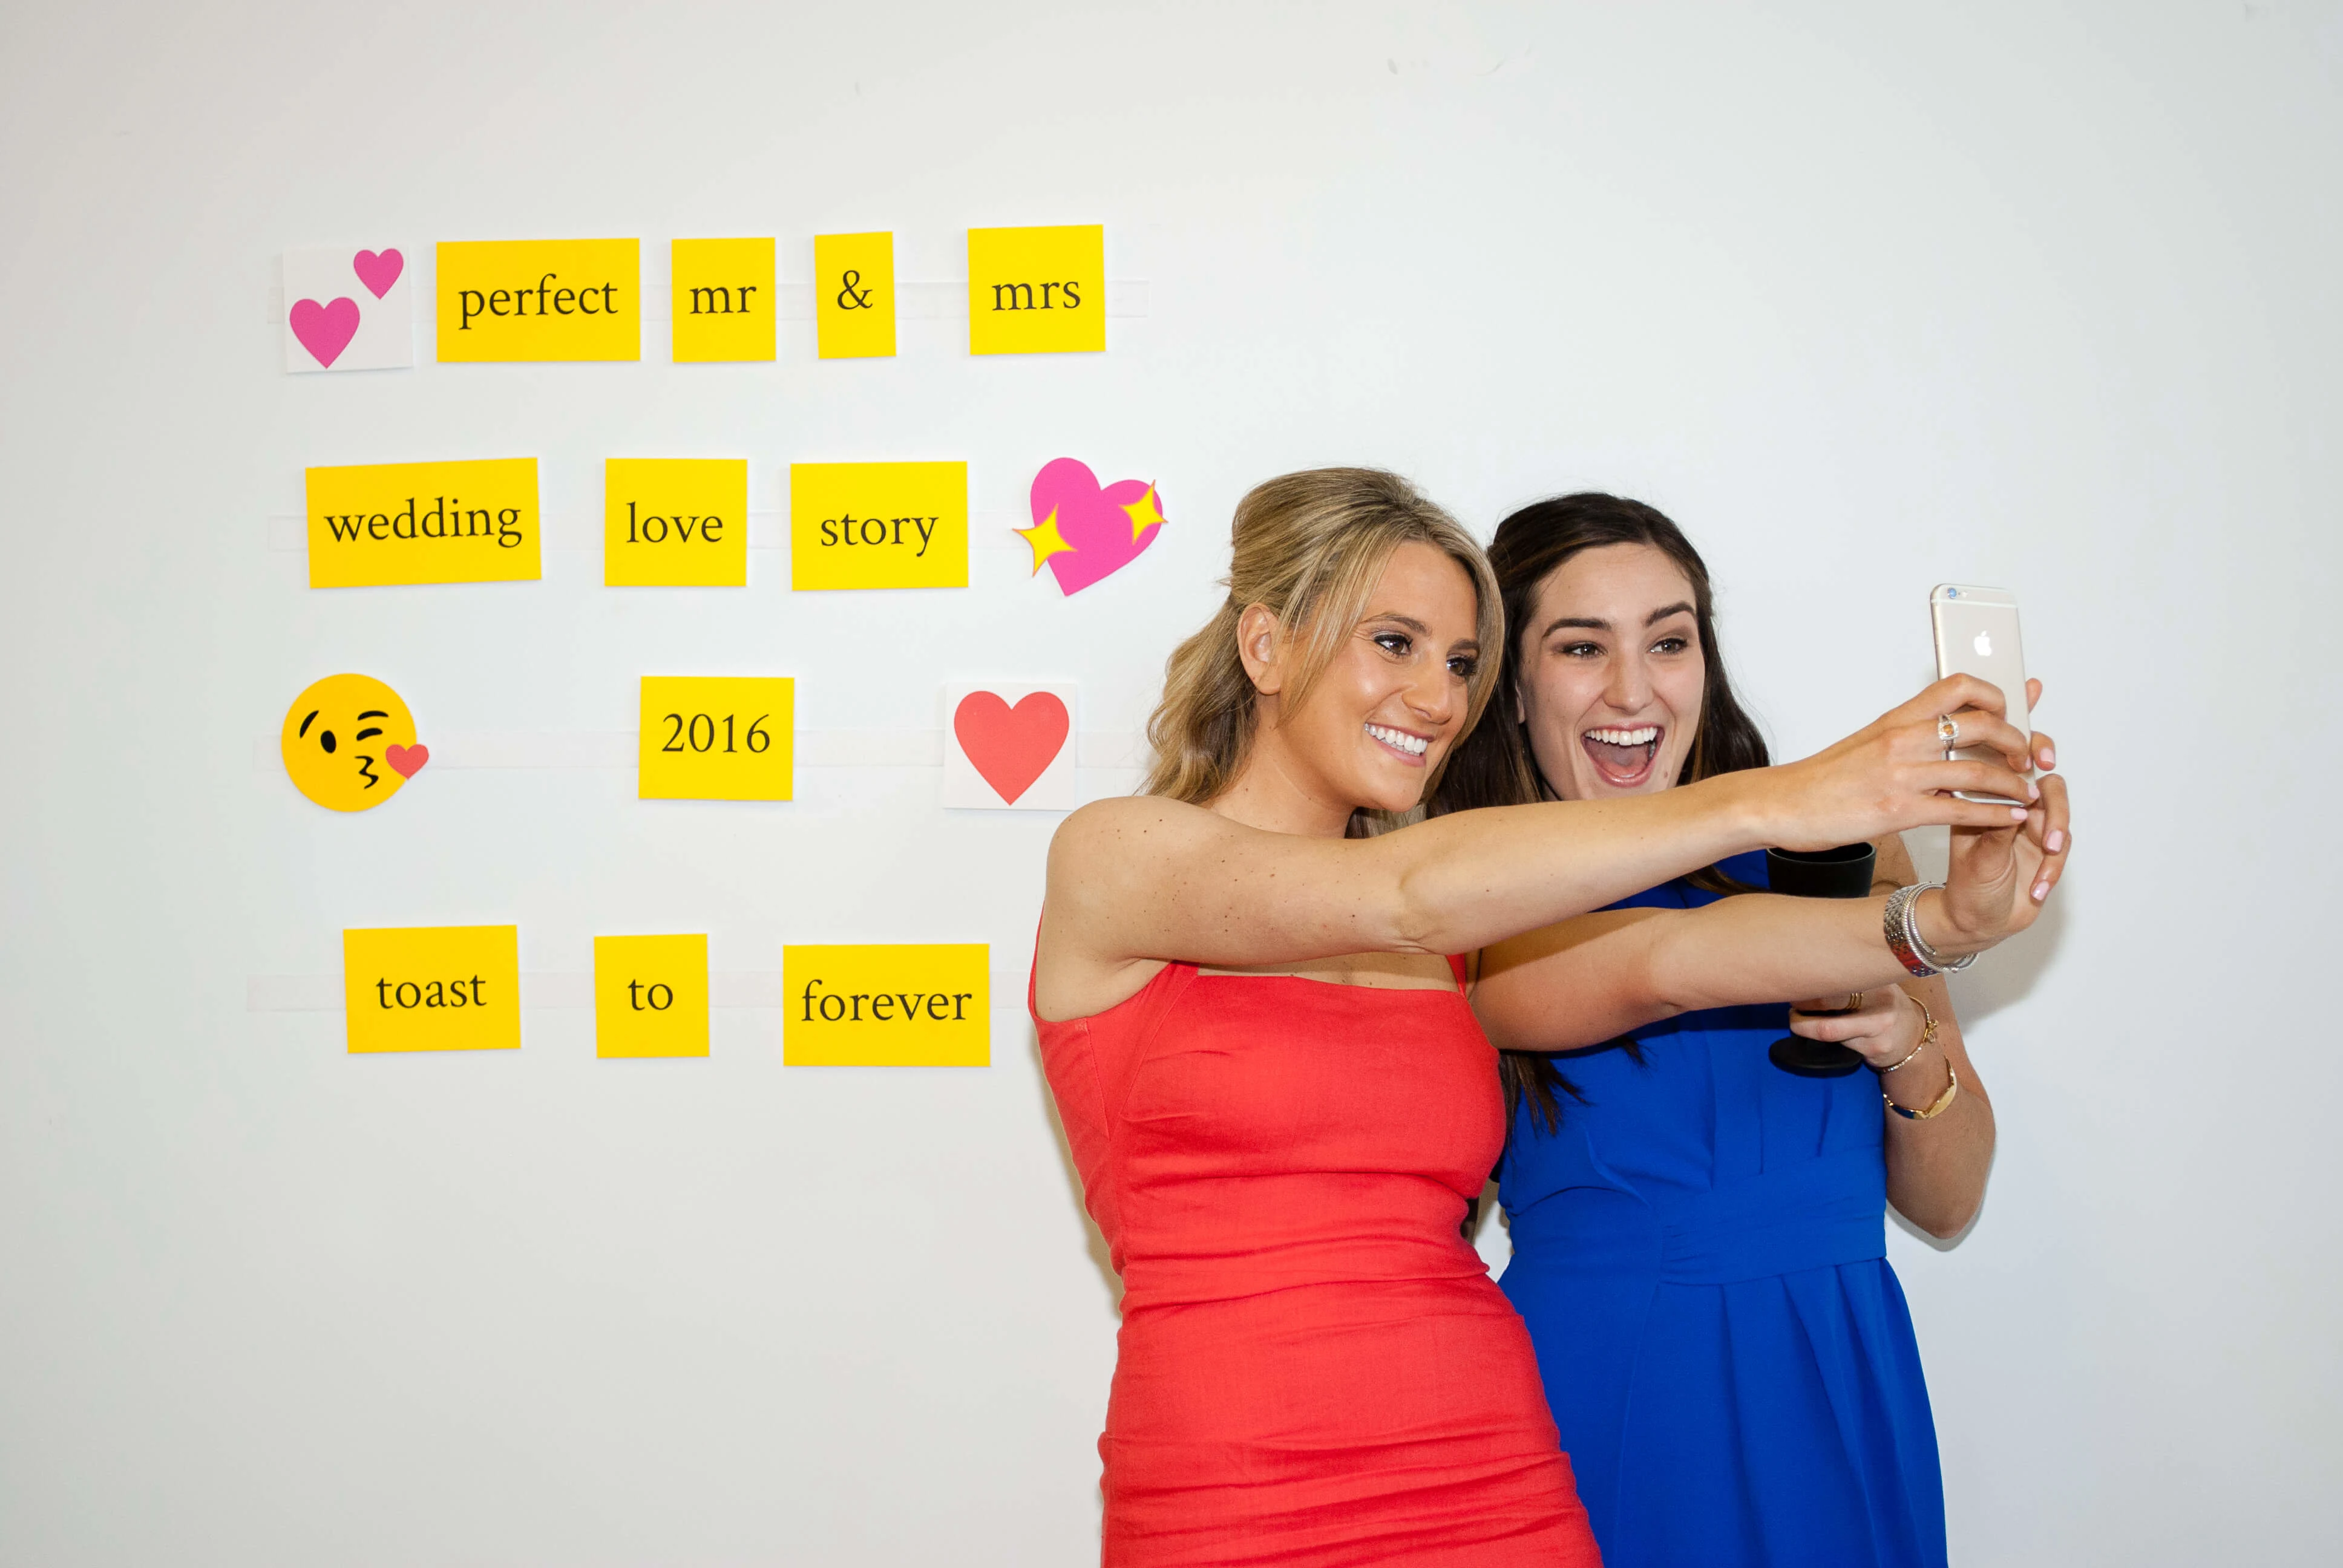 Best Wedding Wishes Photo Booth Backdrop - what a fun and interactive wedding photo booth idea